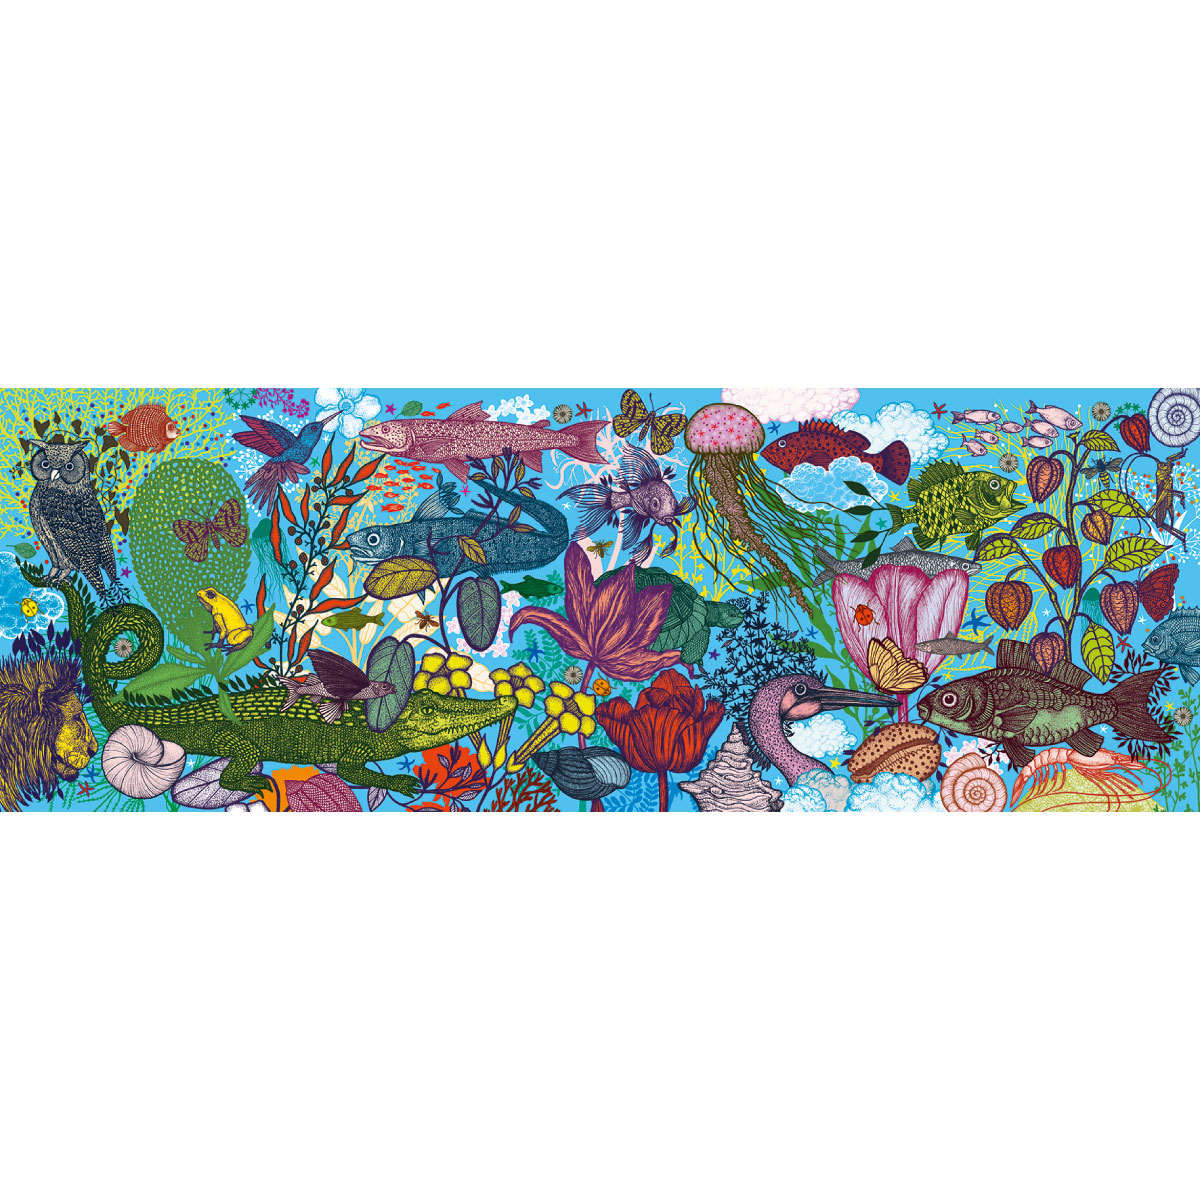 Djeco Gallery Puzzle - Land and Sea 1000pc Jigsaw